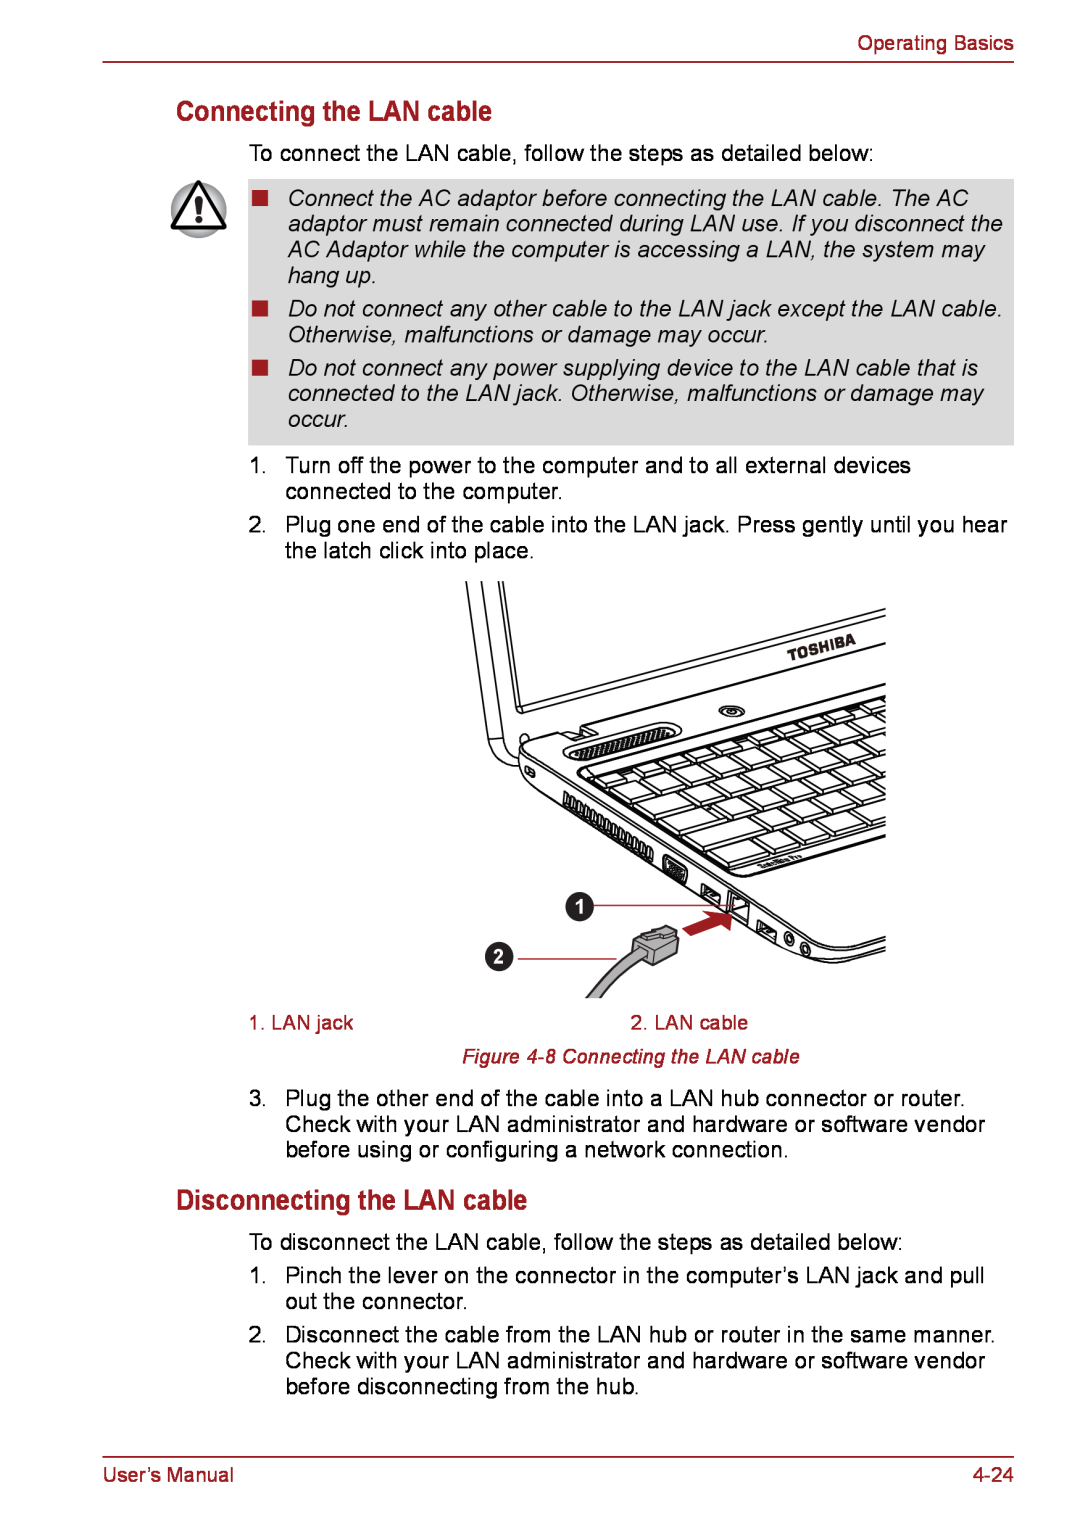 Toshiba PSC08U-02D01D user manual Connecting the LAN cable, Disconnecting the LAN cable 